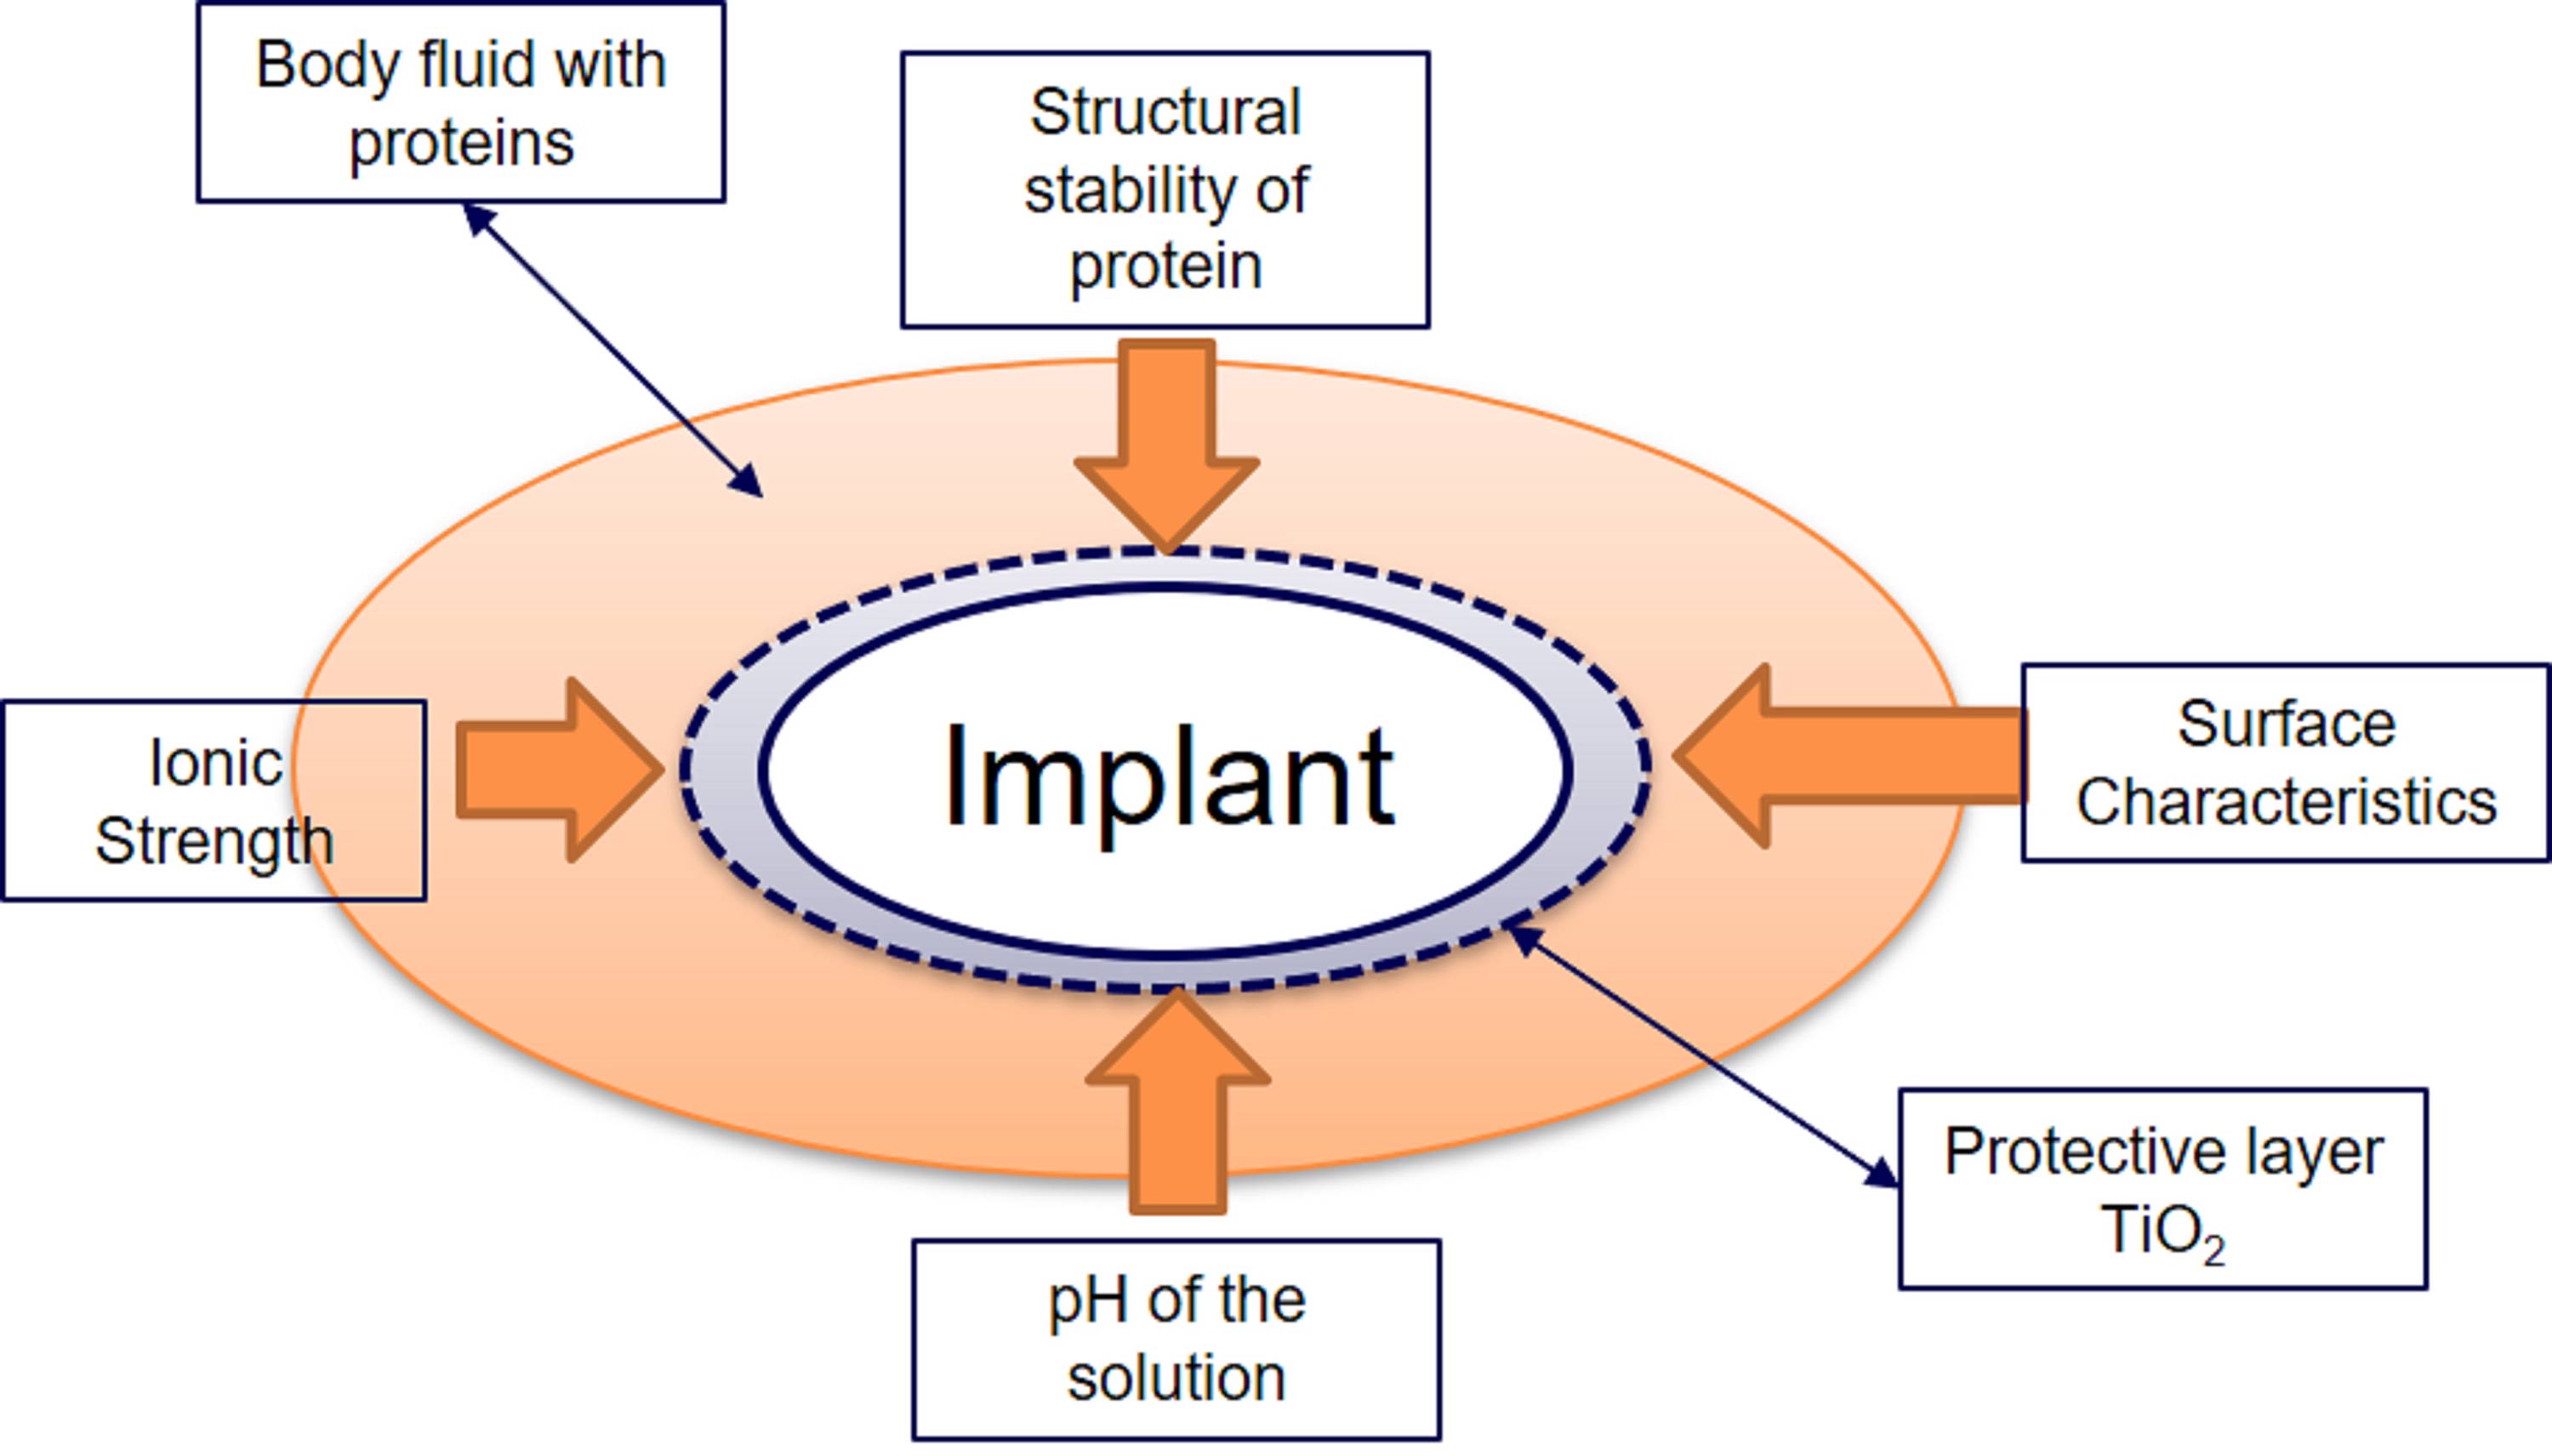 Figure 2: Parameters affecting metal implants in the human body 